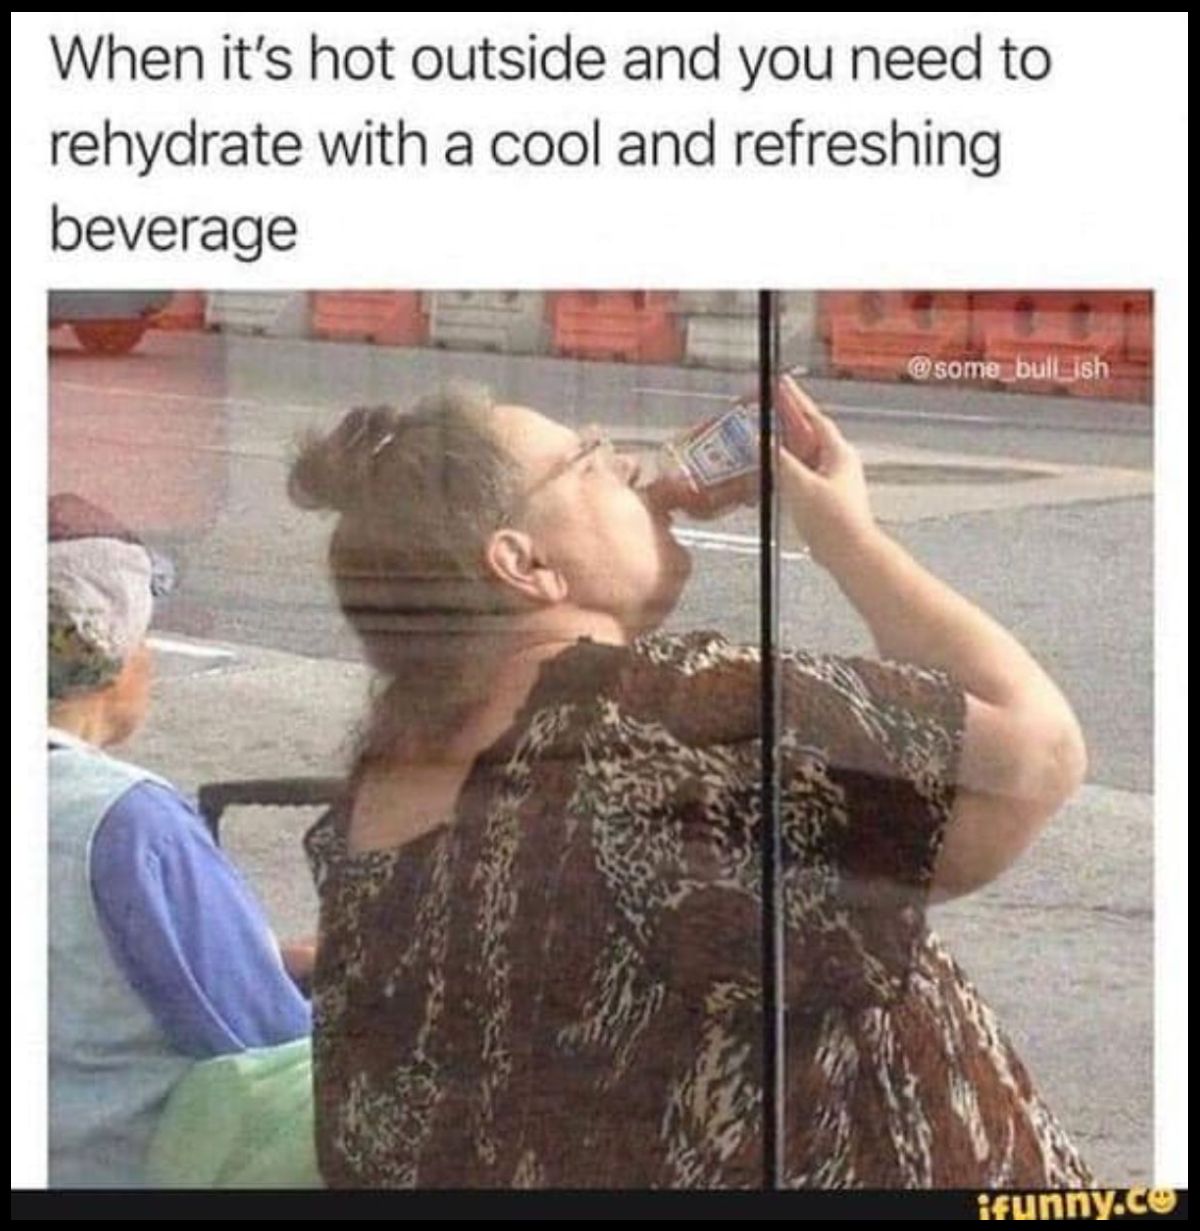 its hot meme - When it's hot outside and you need to rehydrate with a cool and refreshing beverage ifunny.co